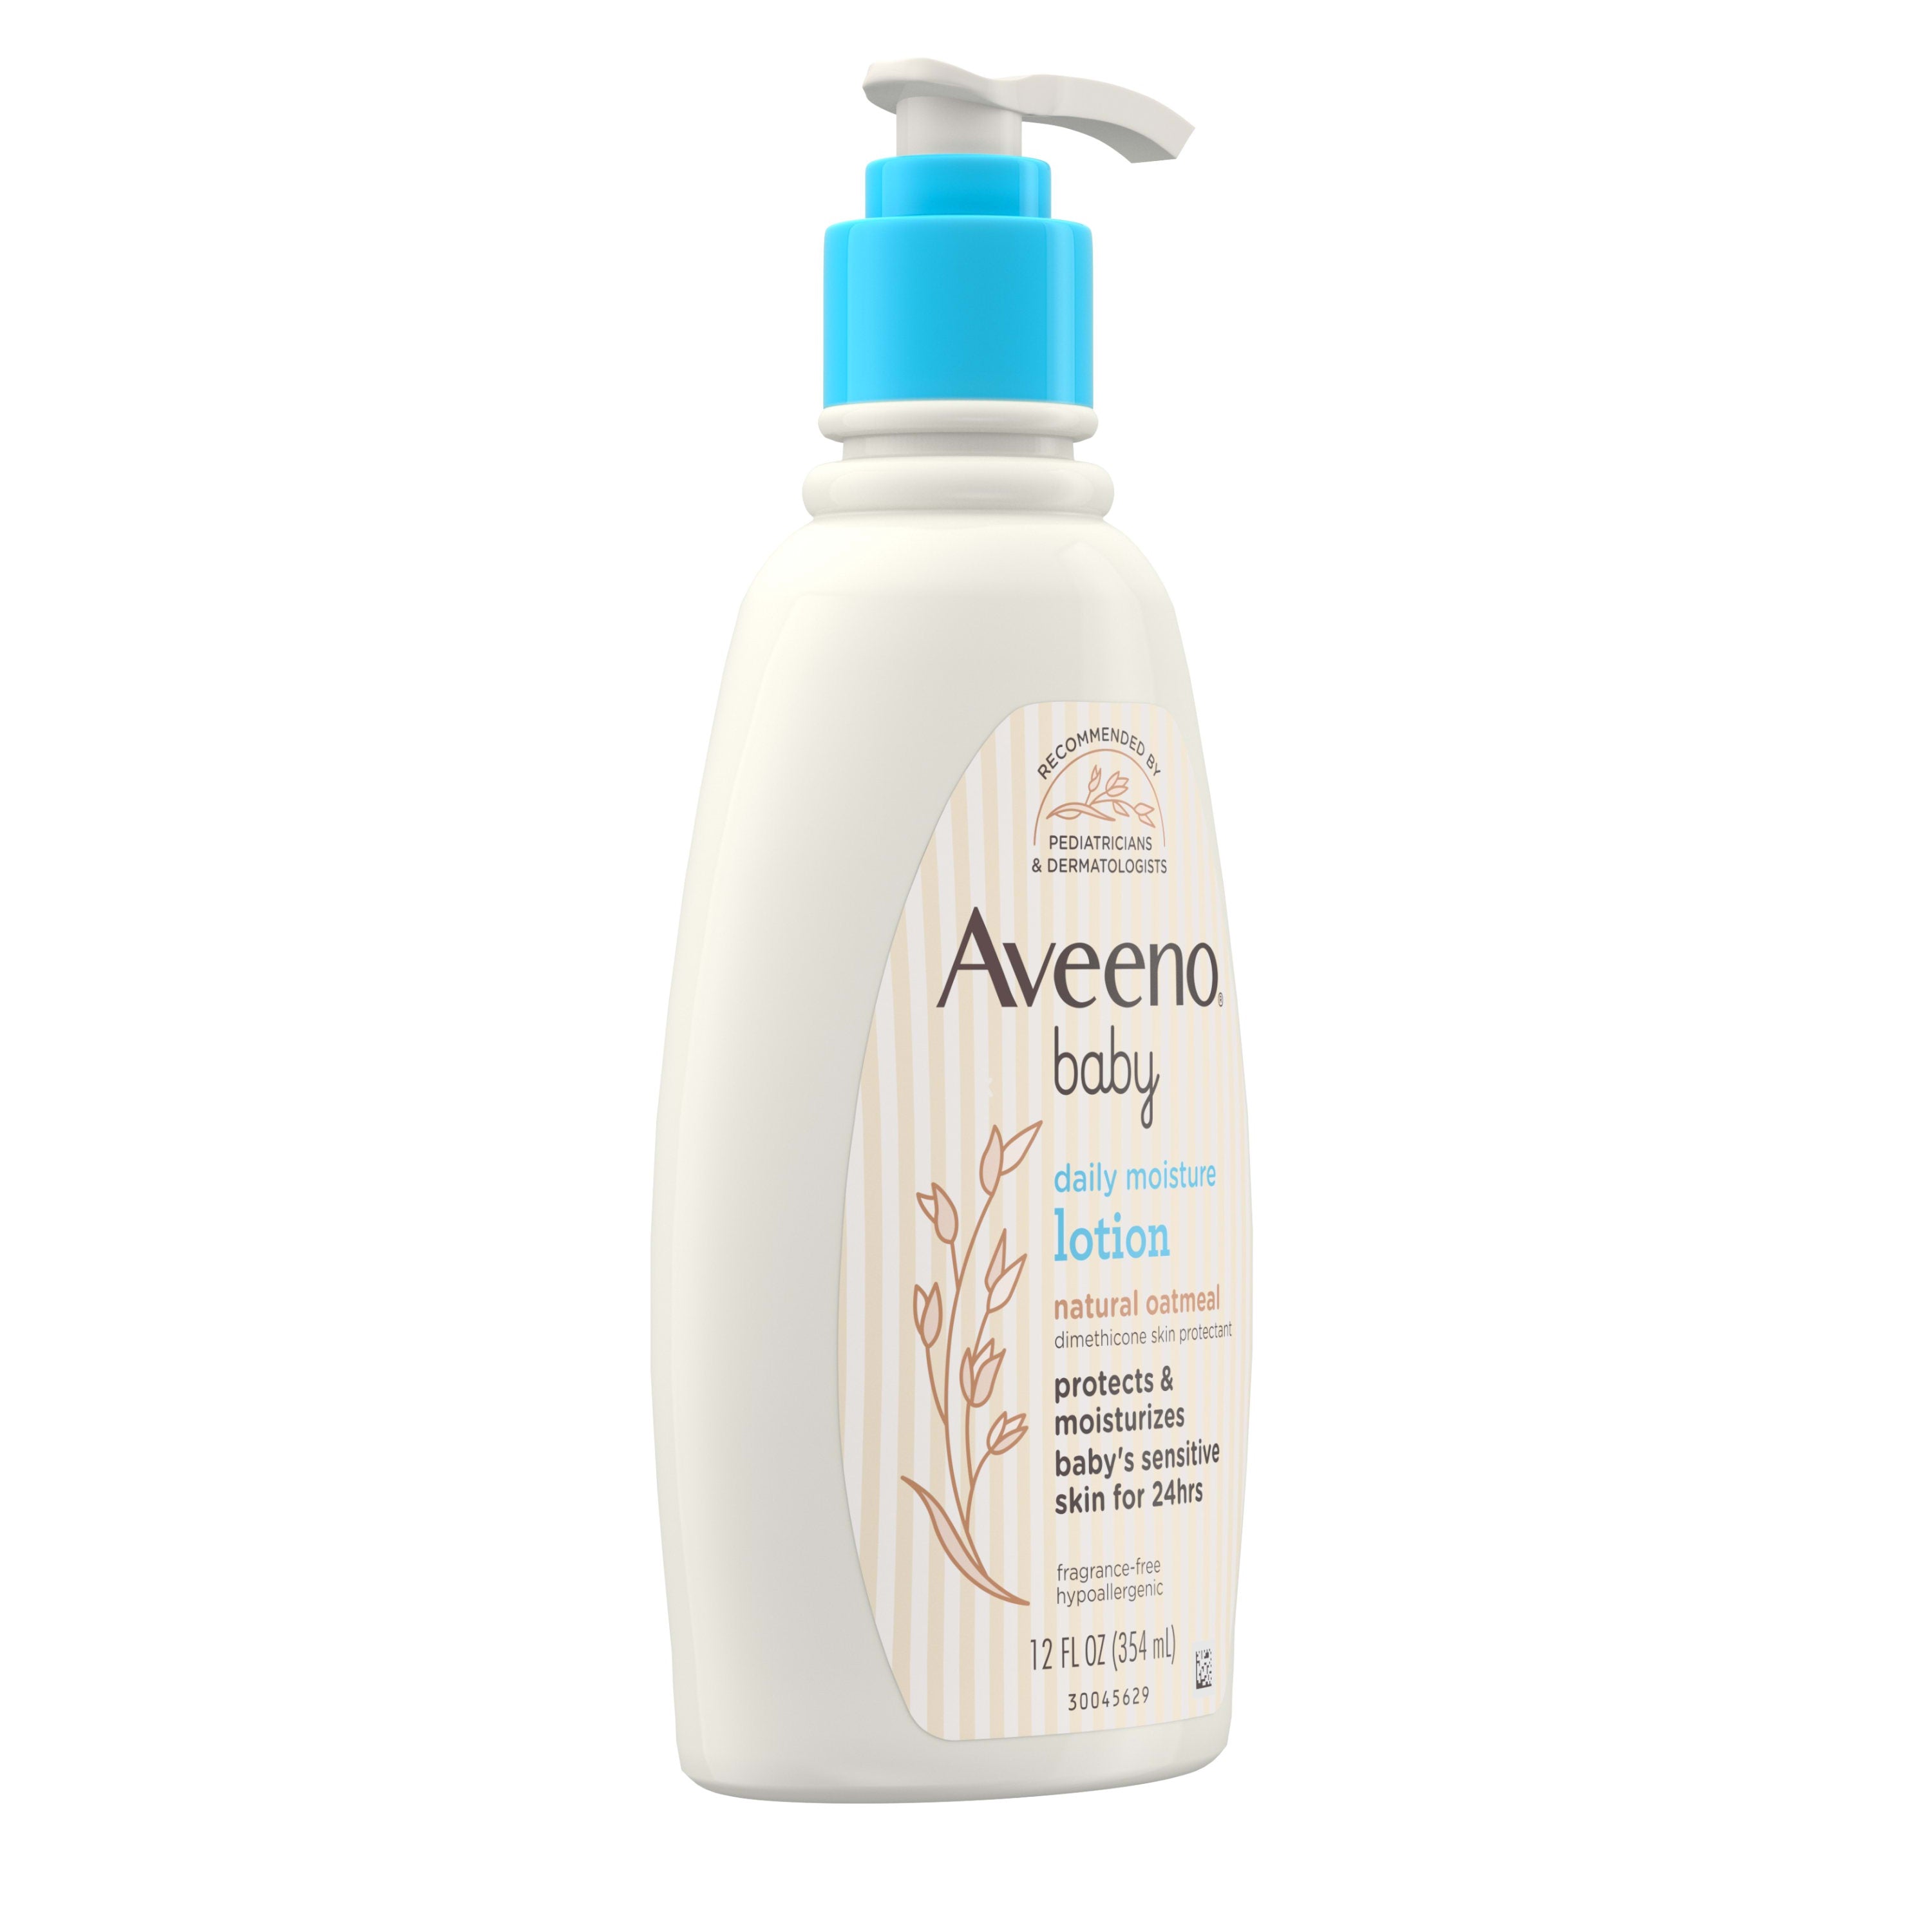 Aveeno Baby Daily Moisture Lotion with Natural Oatmeal 354 ml